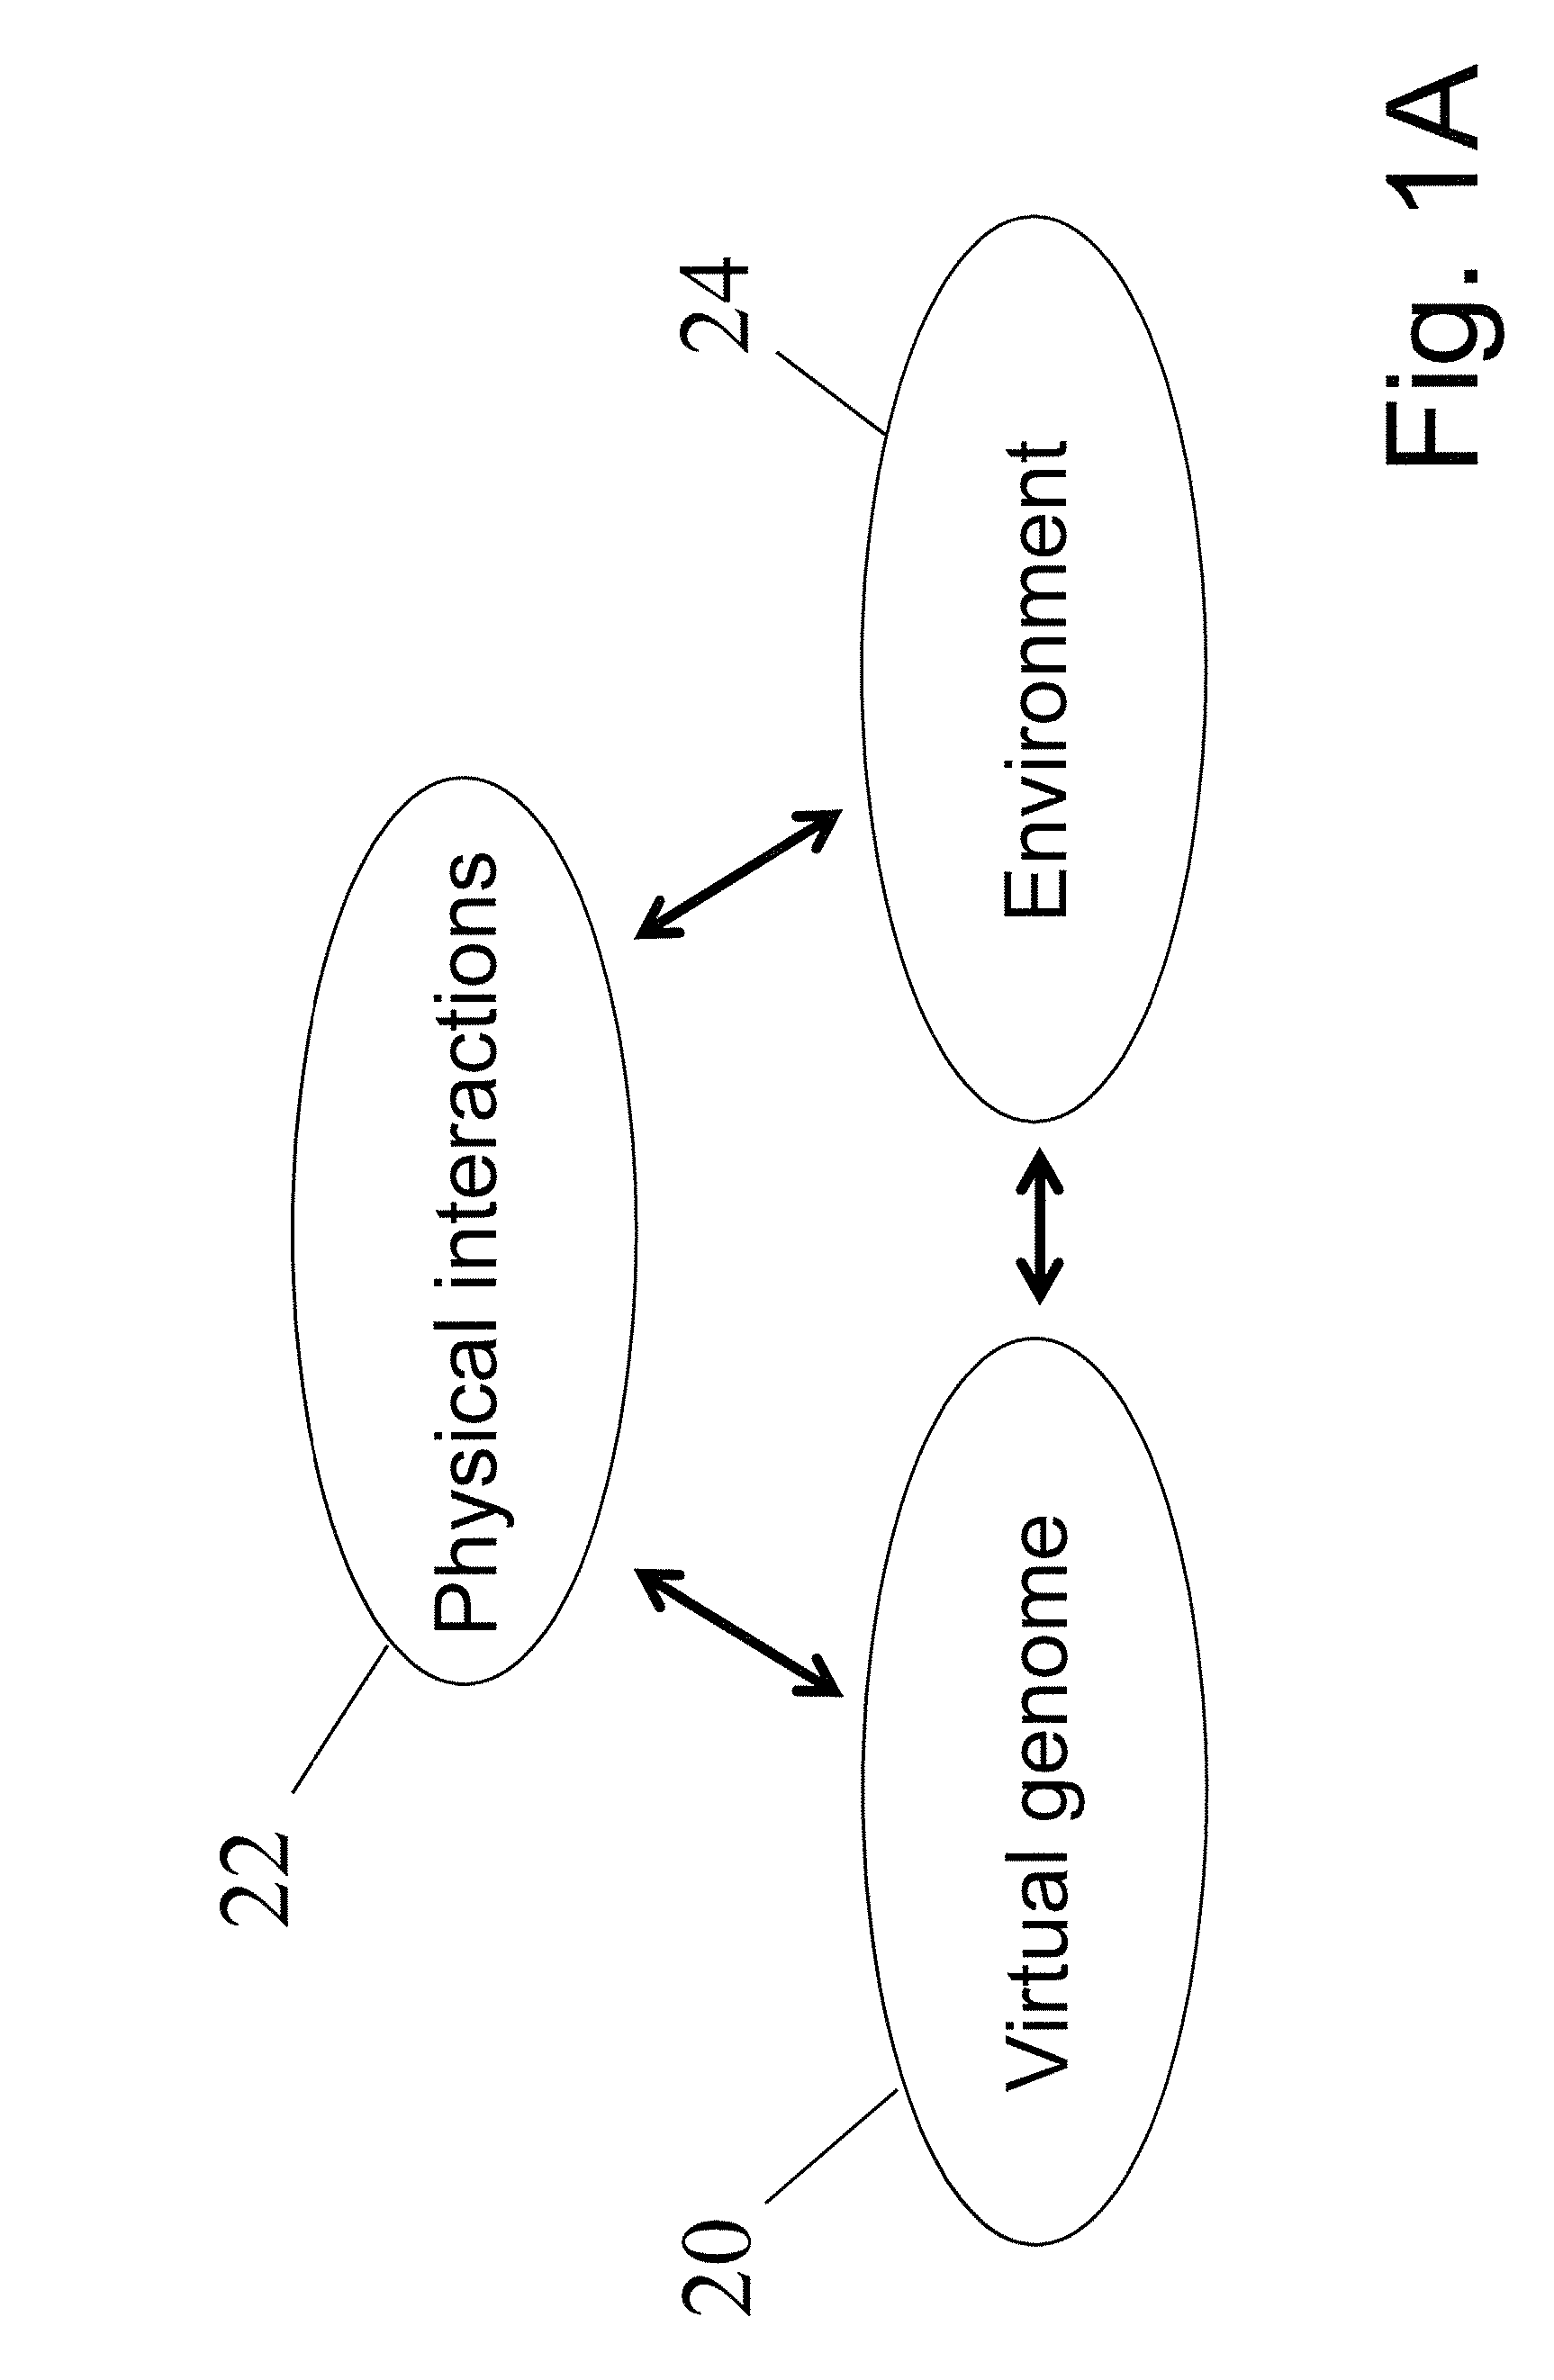 Virtual tissue with emergent behavior and modeling method for producing the tissue